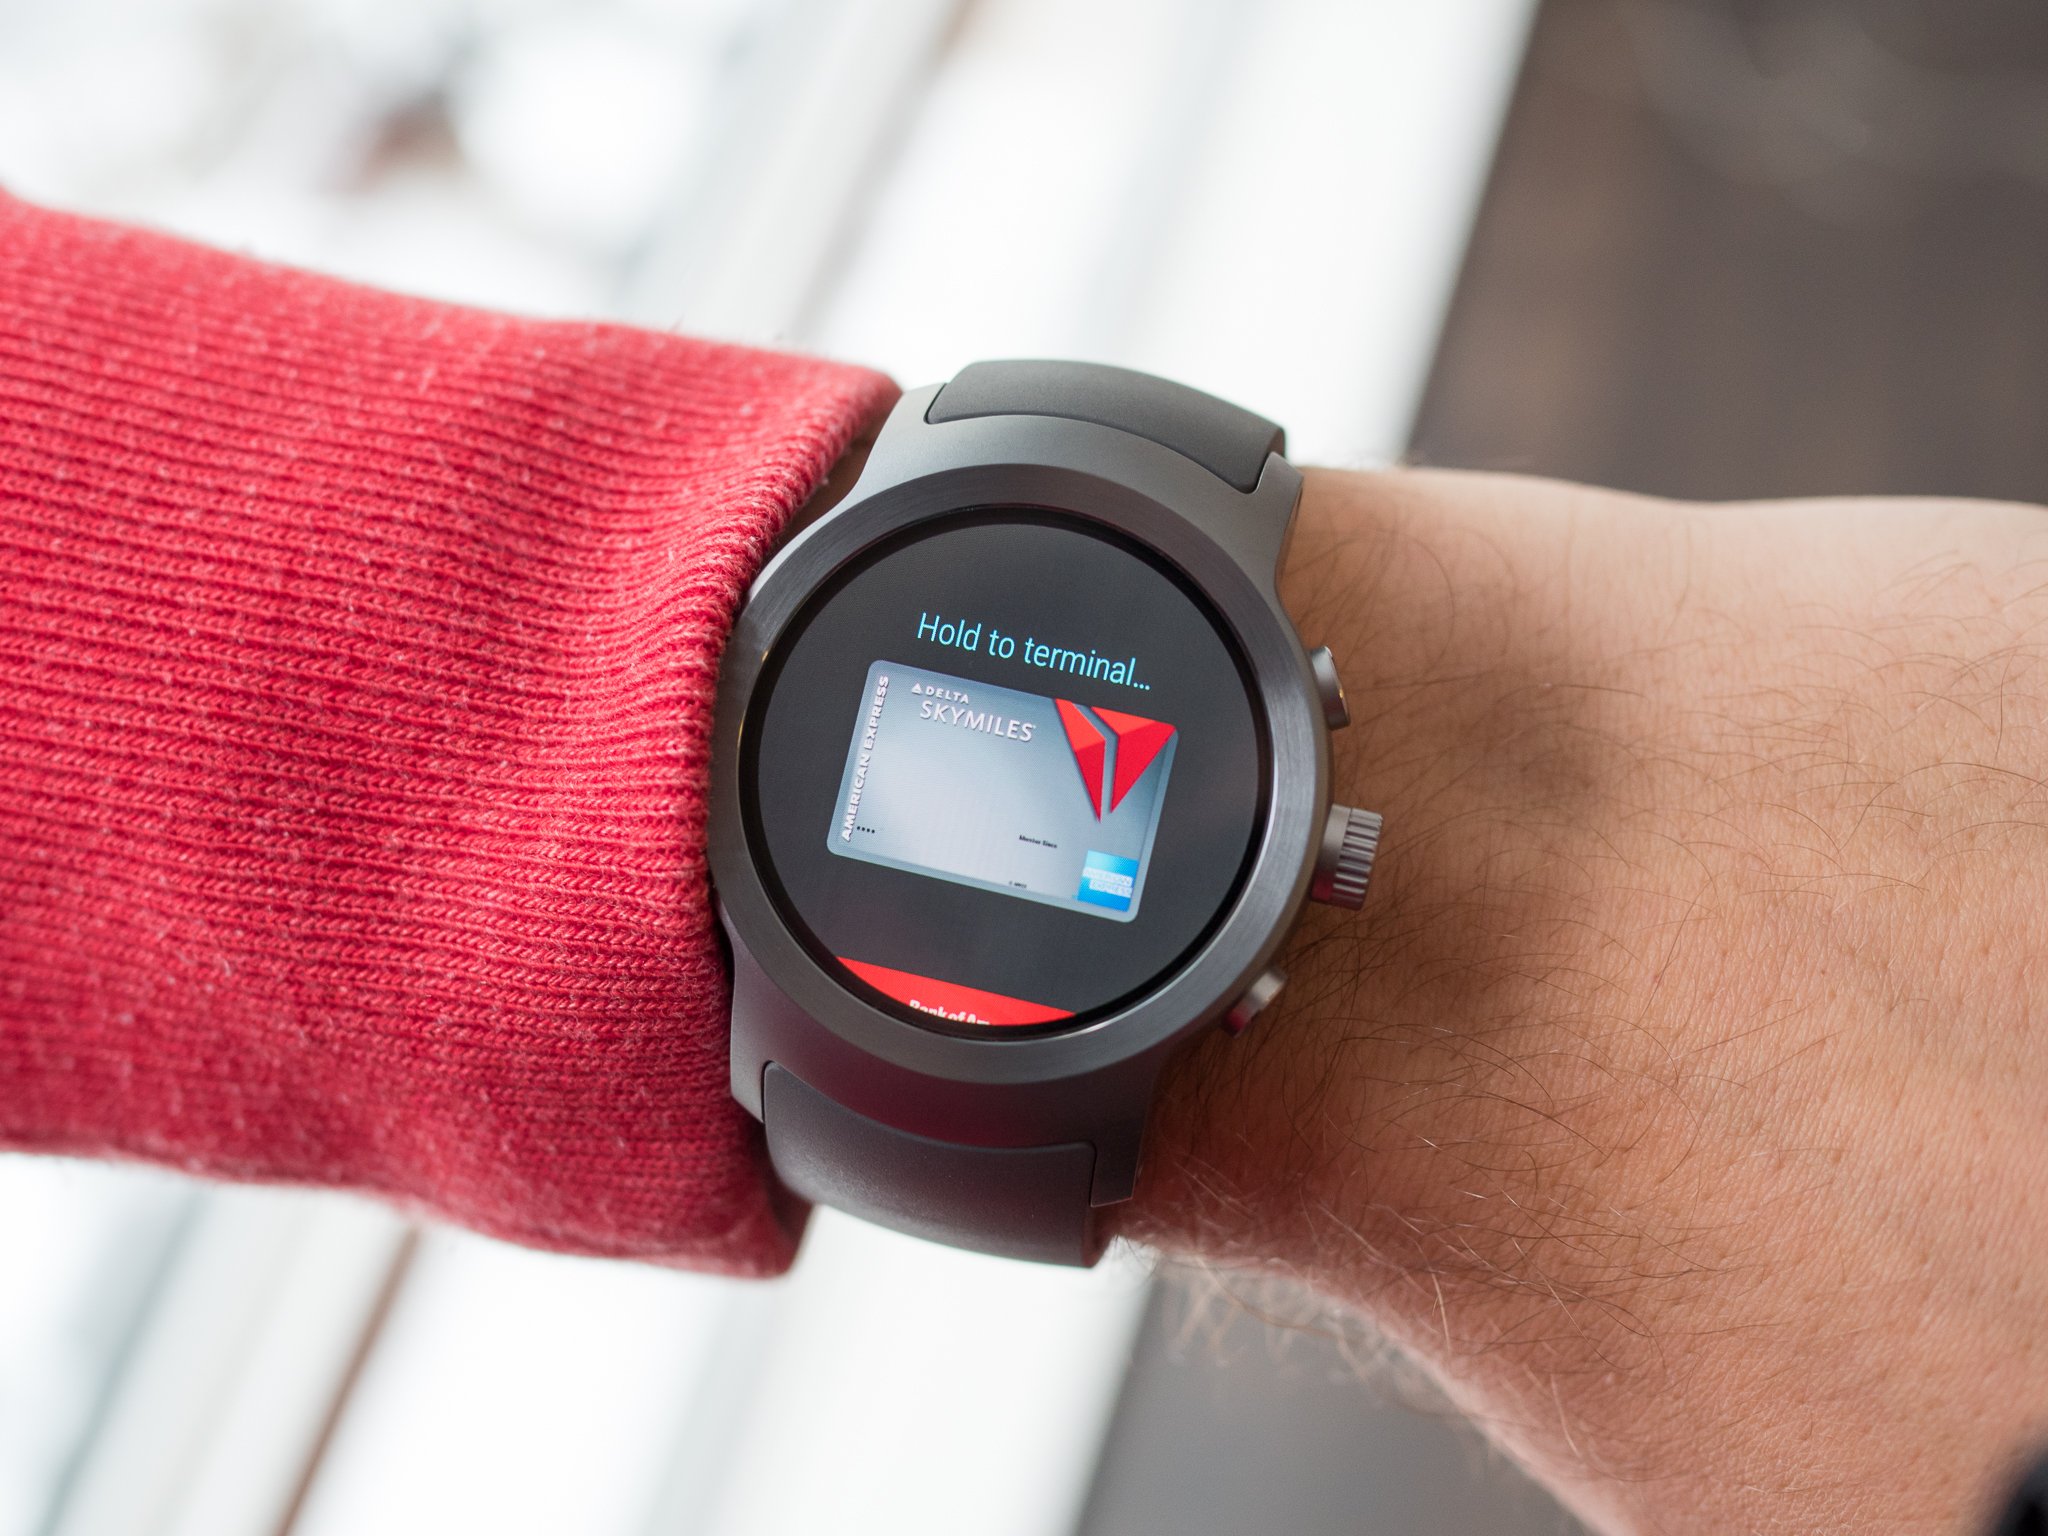 How To Use Android Pay On An Android Wear Smartwatch